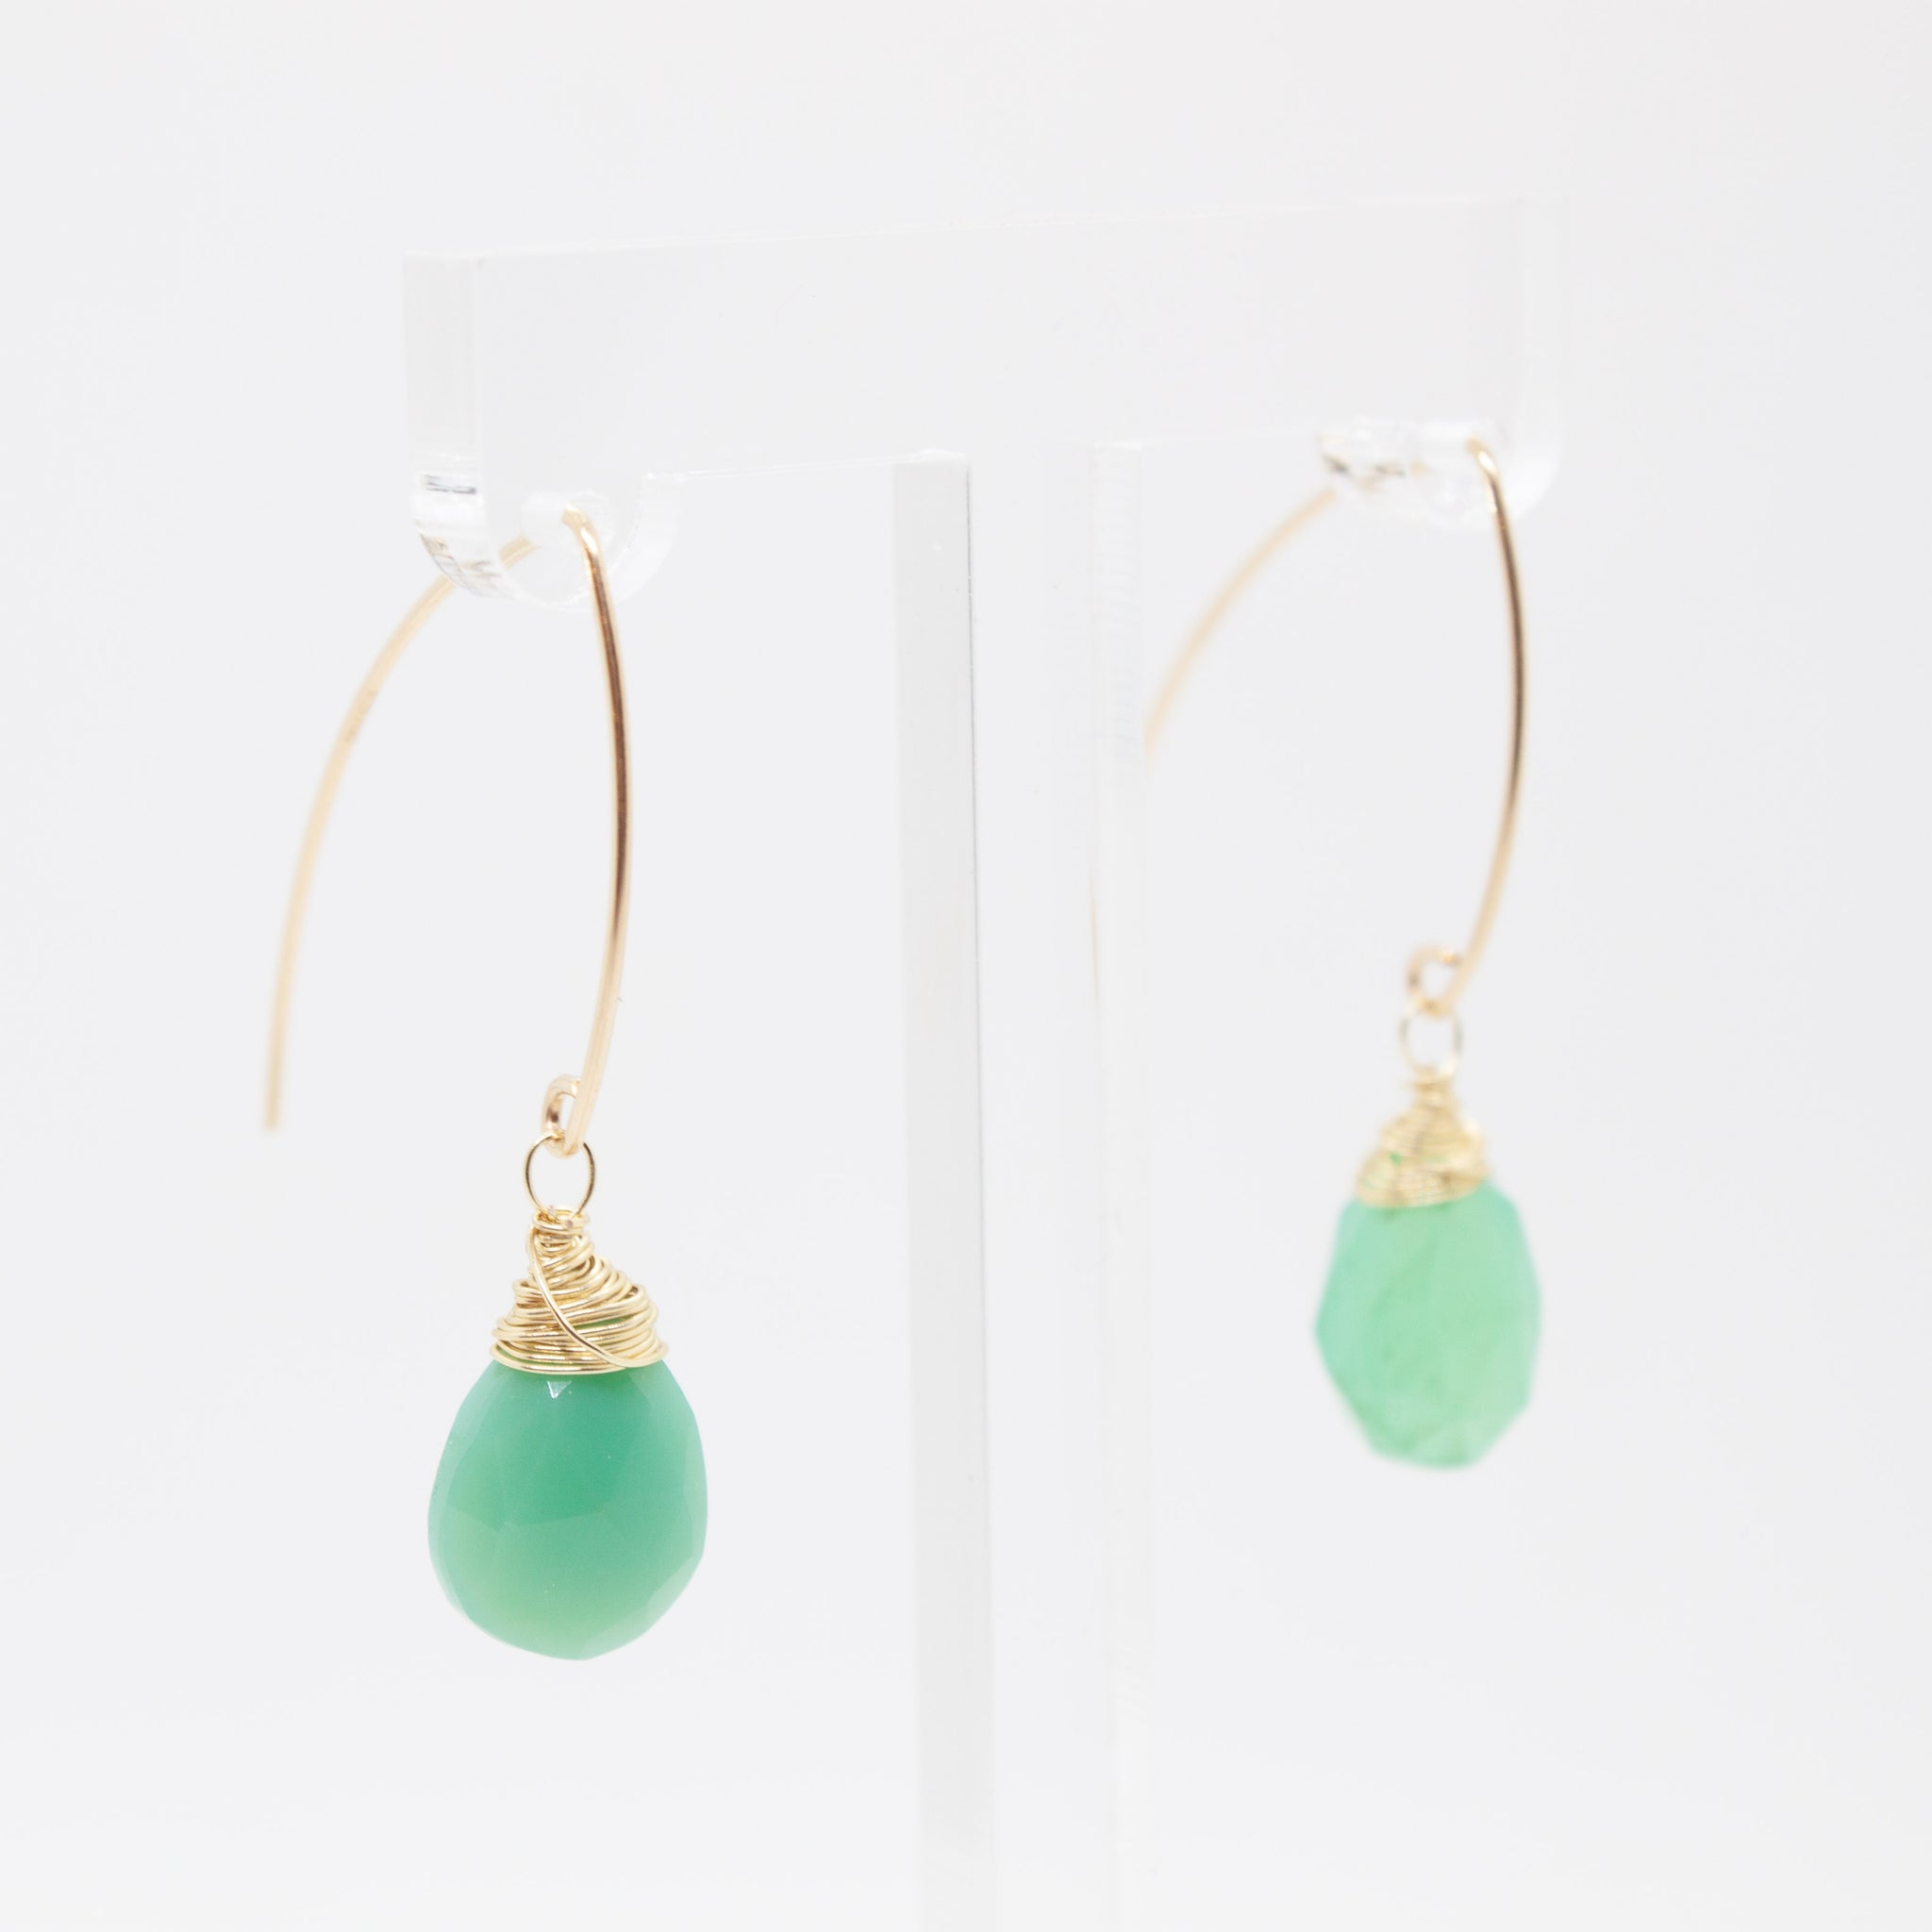 Bring joy, hope and happiness to your pretty lobes this summer with these delicate chrysoprase drops wrapped in gold. 1 inch earrings made with faceted, pear-shaped chrysoprase briolettes, wrapped in 14 karat gold wire on gold-filled earring hooks. Hypo-allergenic and sensitive ear friendly. Handmade in Toronto by kp jewelry co.